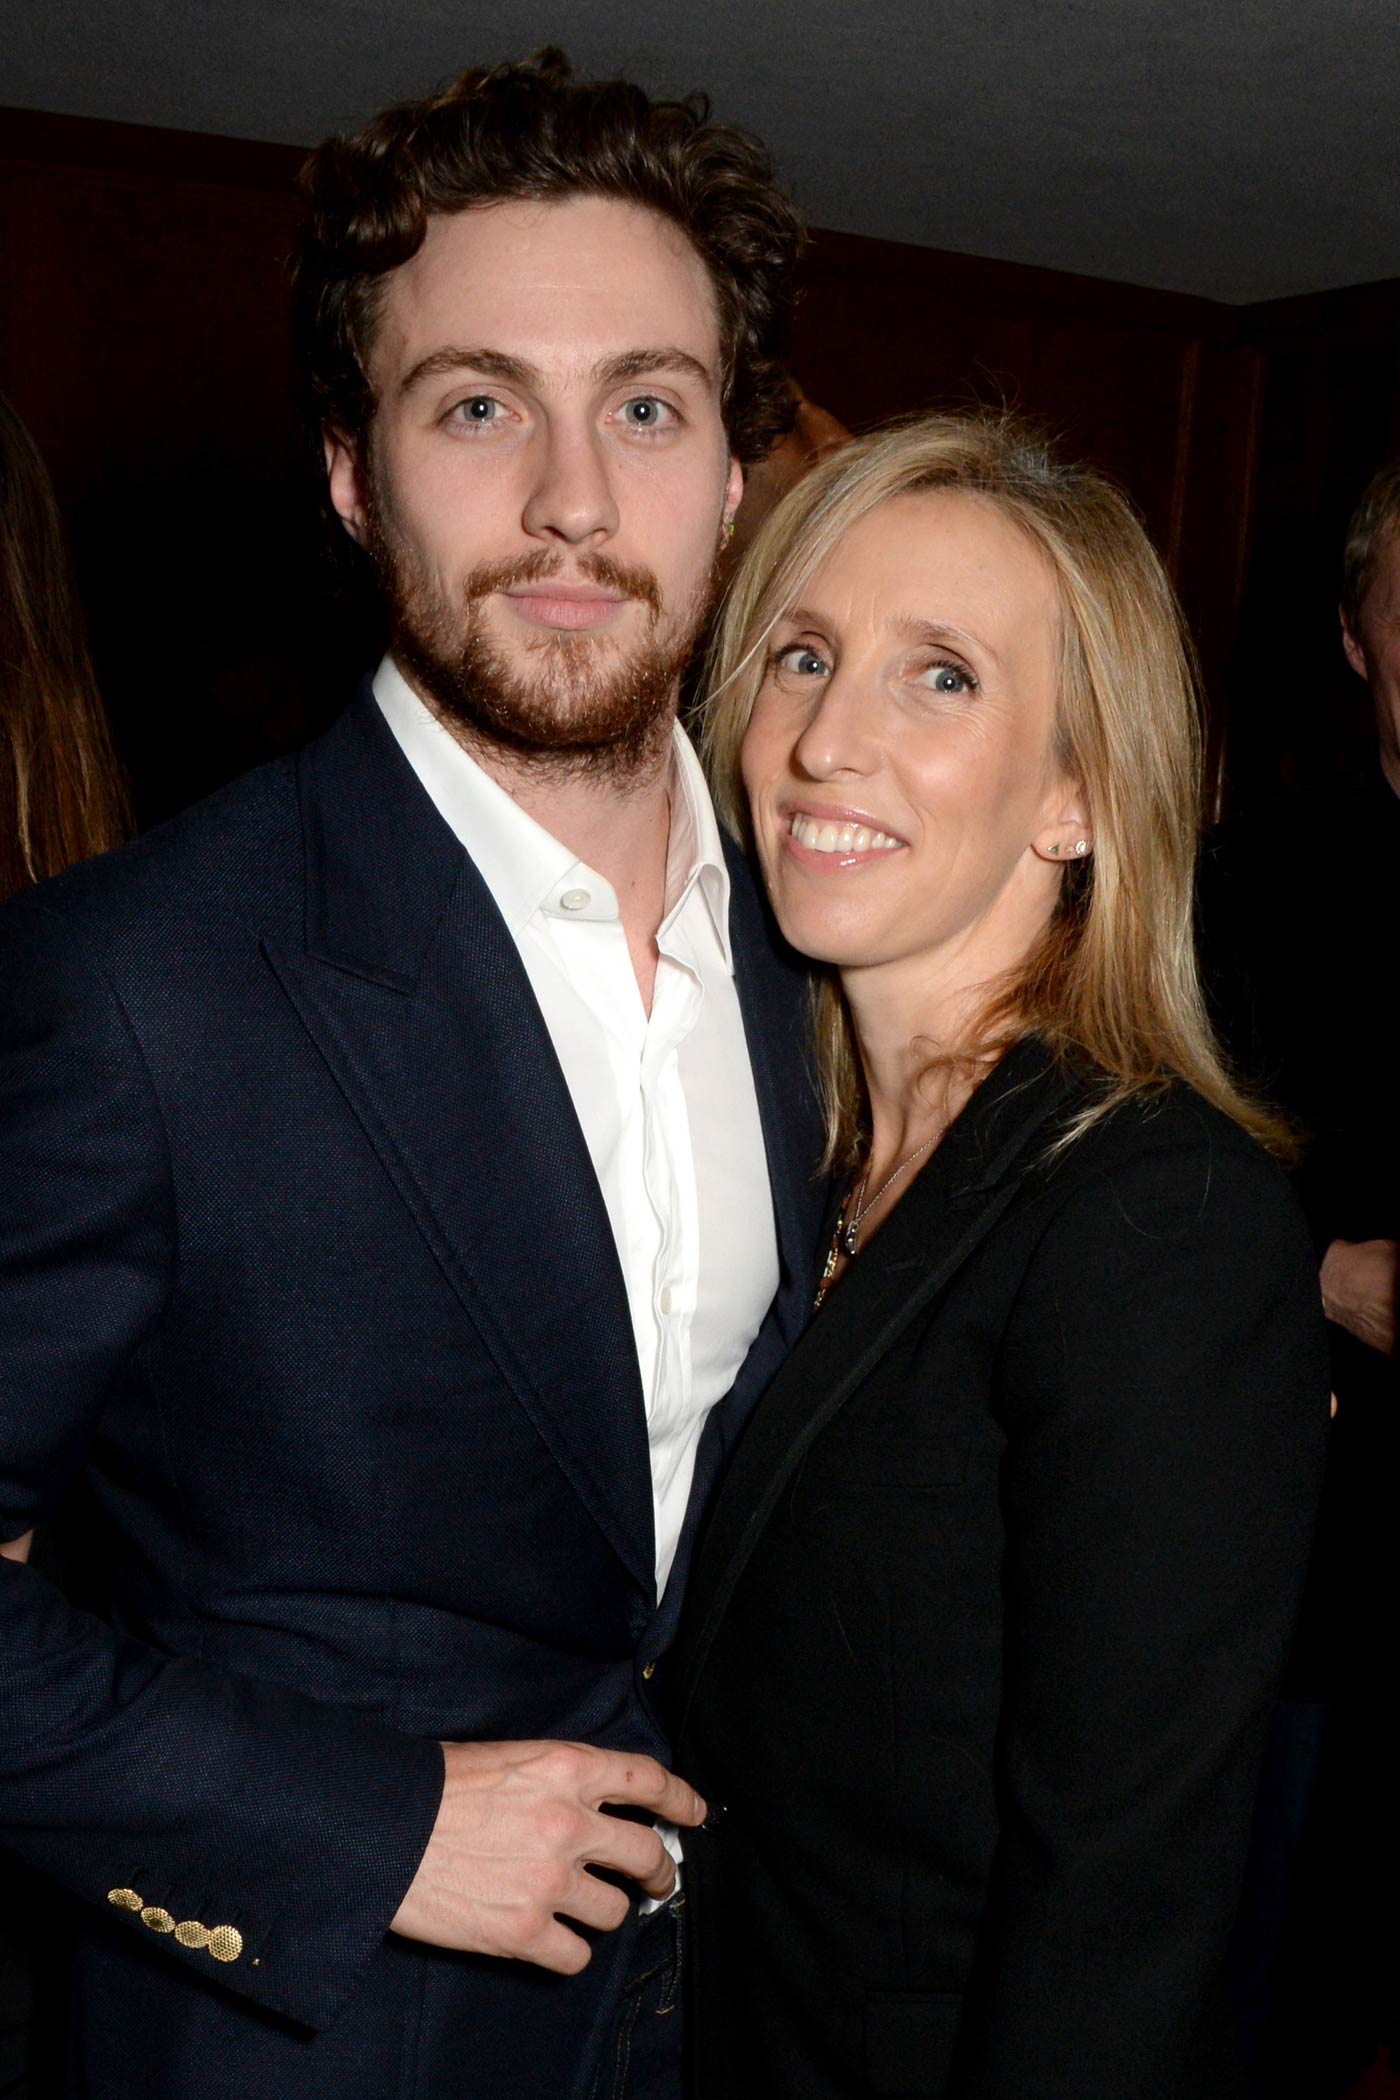 Interview Meet Fifty Shades of Grey Direct Sam TaylorJohnson Time